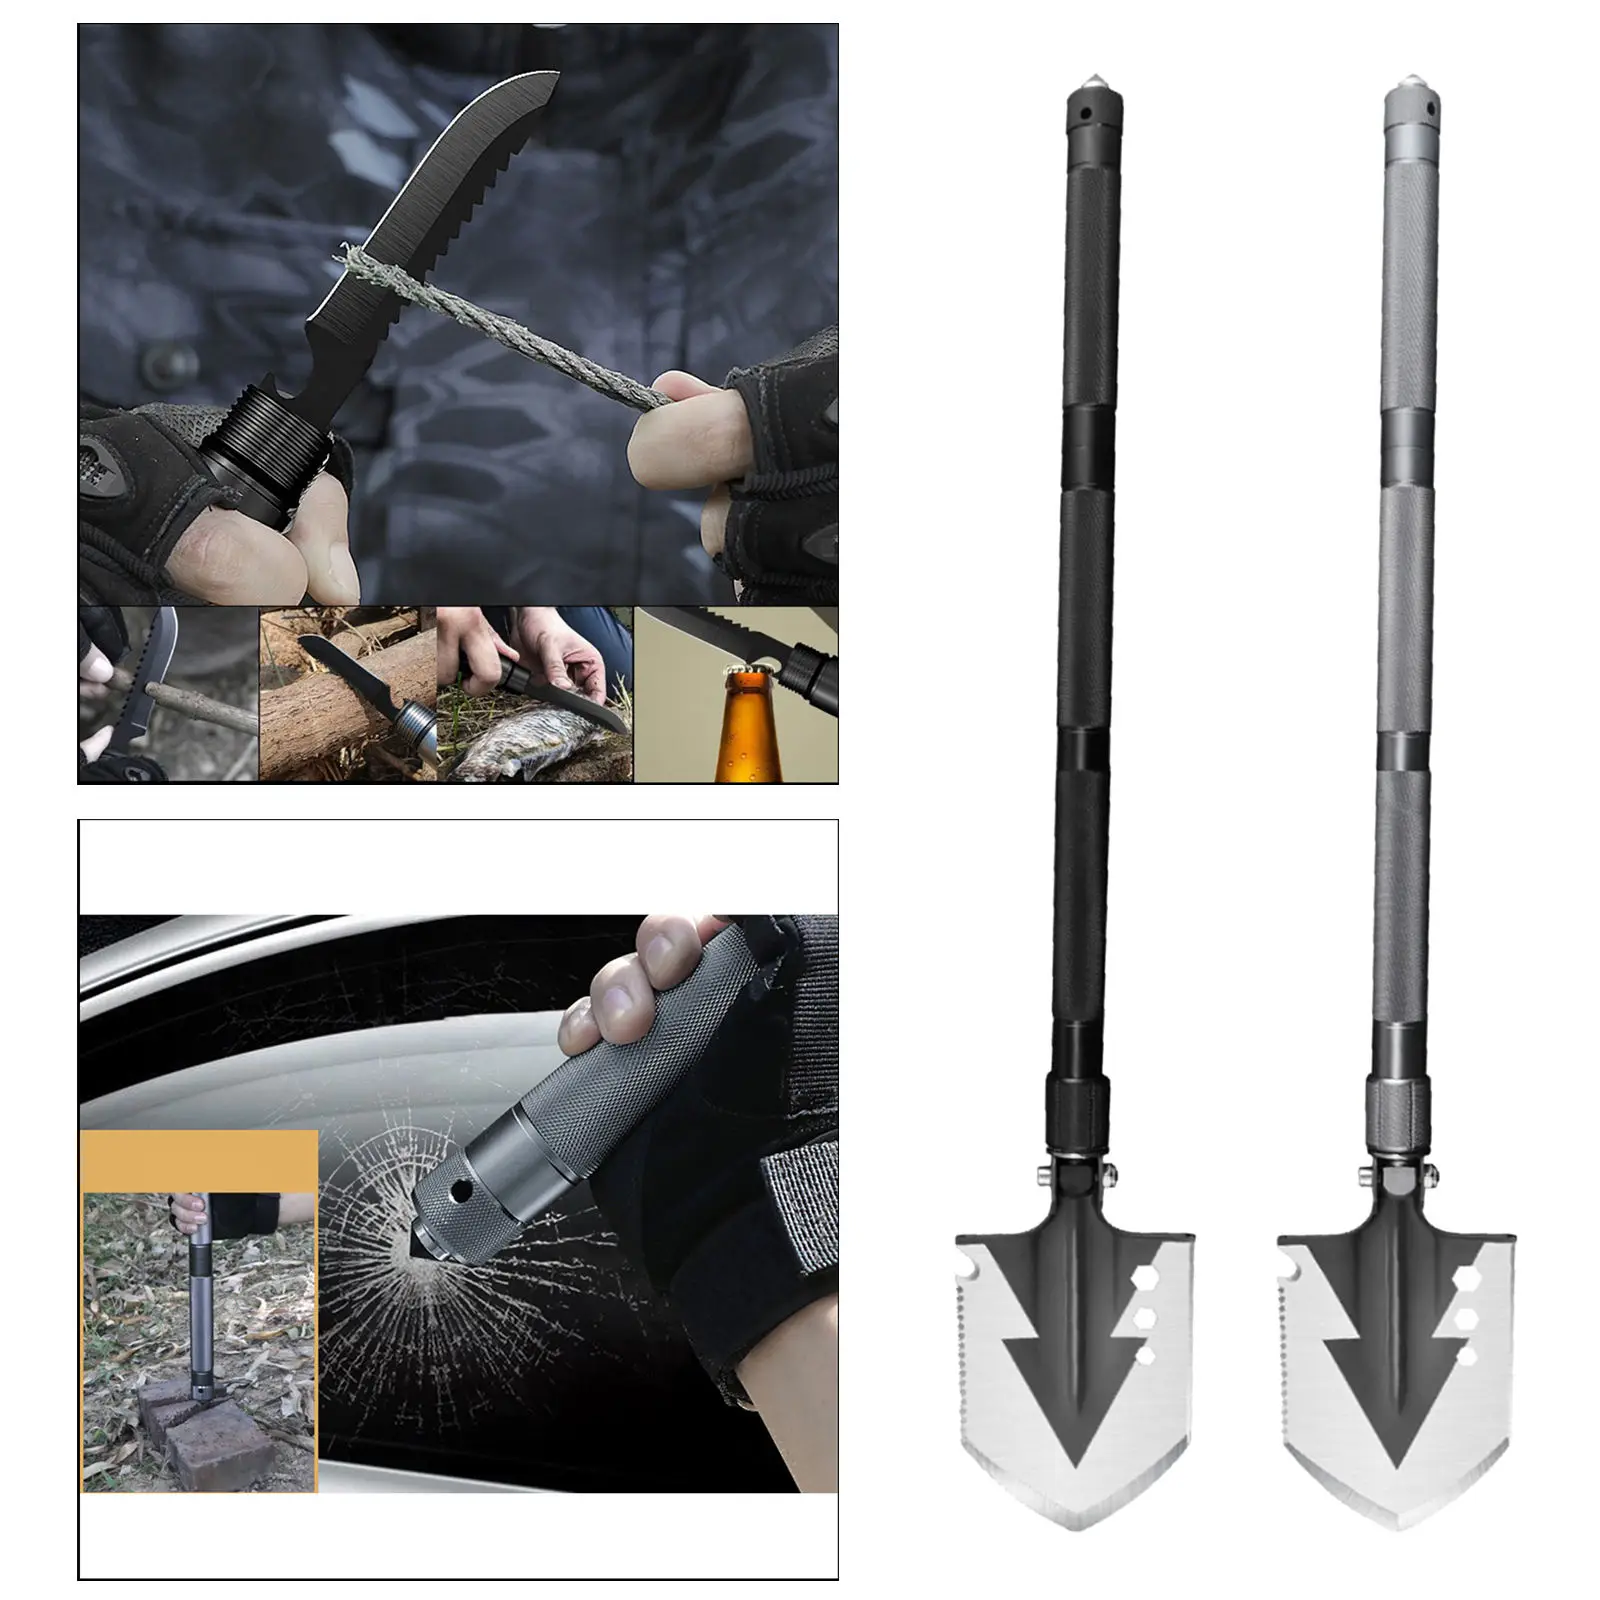 Military Folding Shovel - Tactical Multitool Spade Kit for Camping, Hiking, Backpacking, Fishing, Trench Entrenching Tools